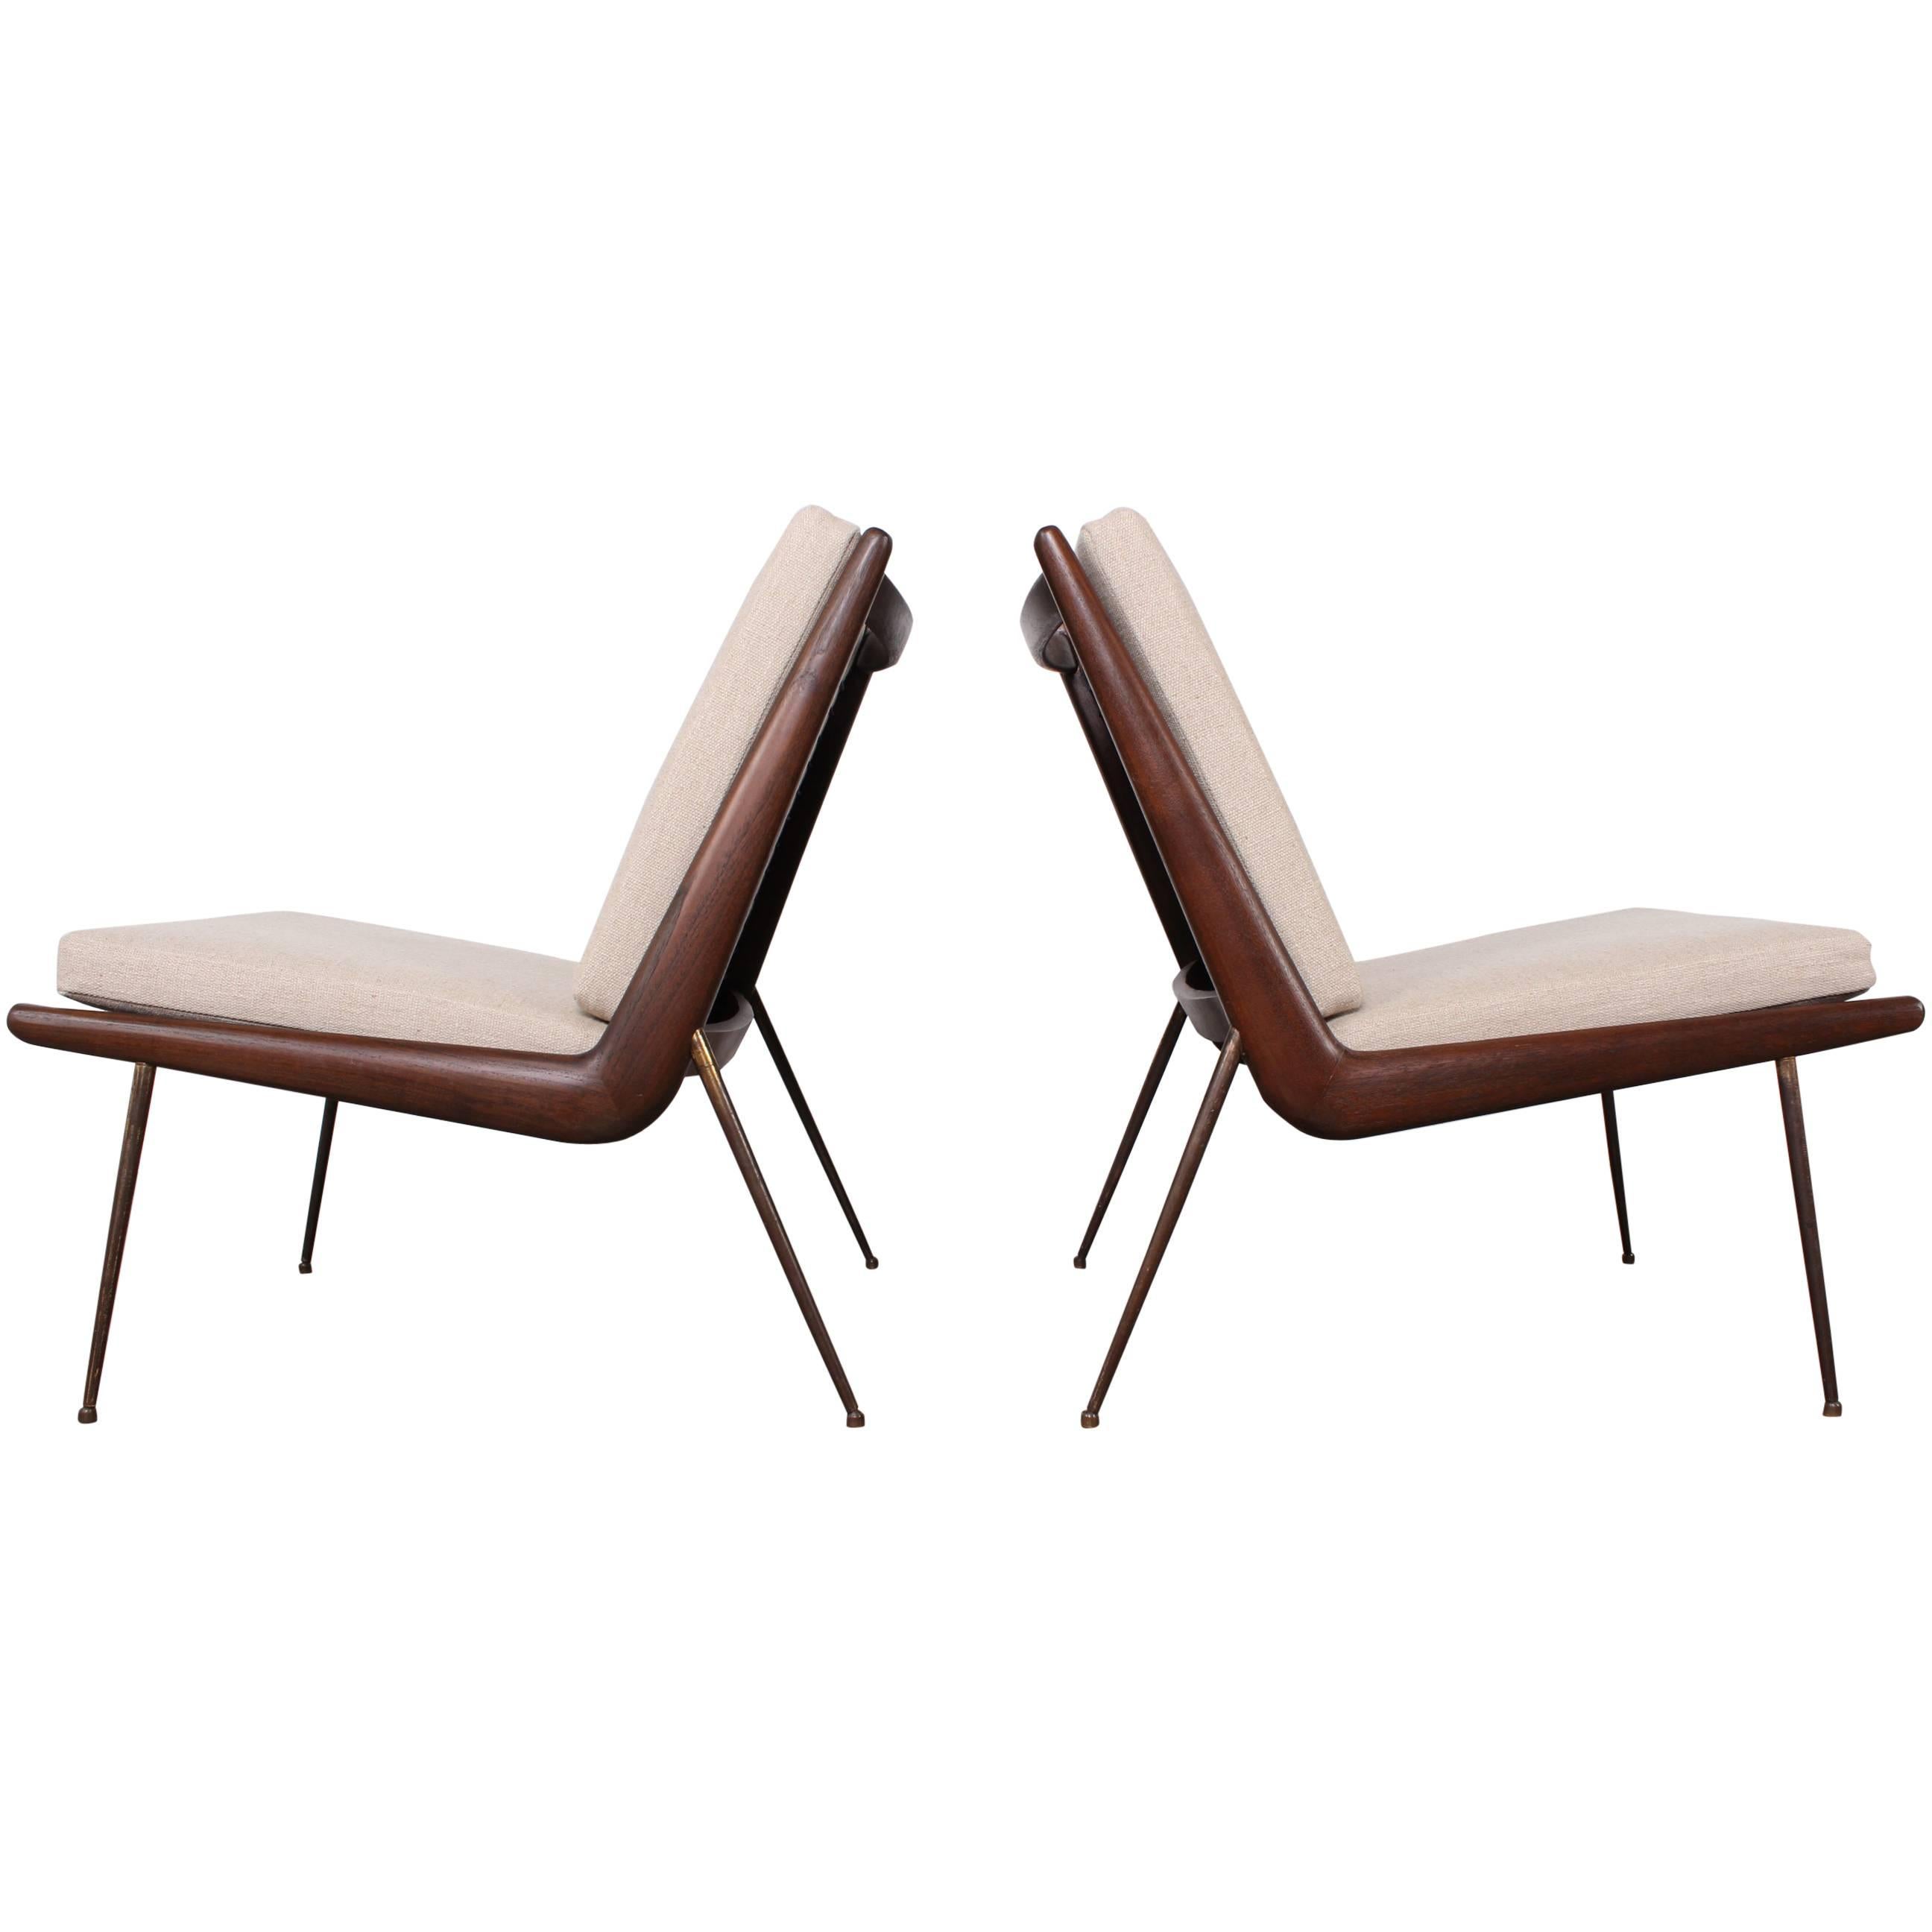 Pair of Lounge Chairs by Peter Hvidt and Orla Mølgaard-Nielsen